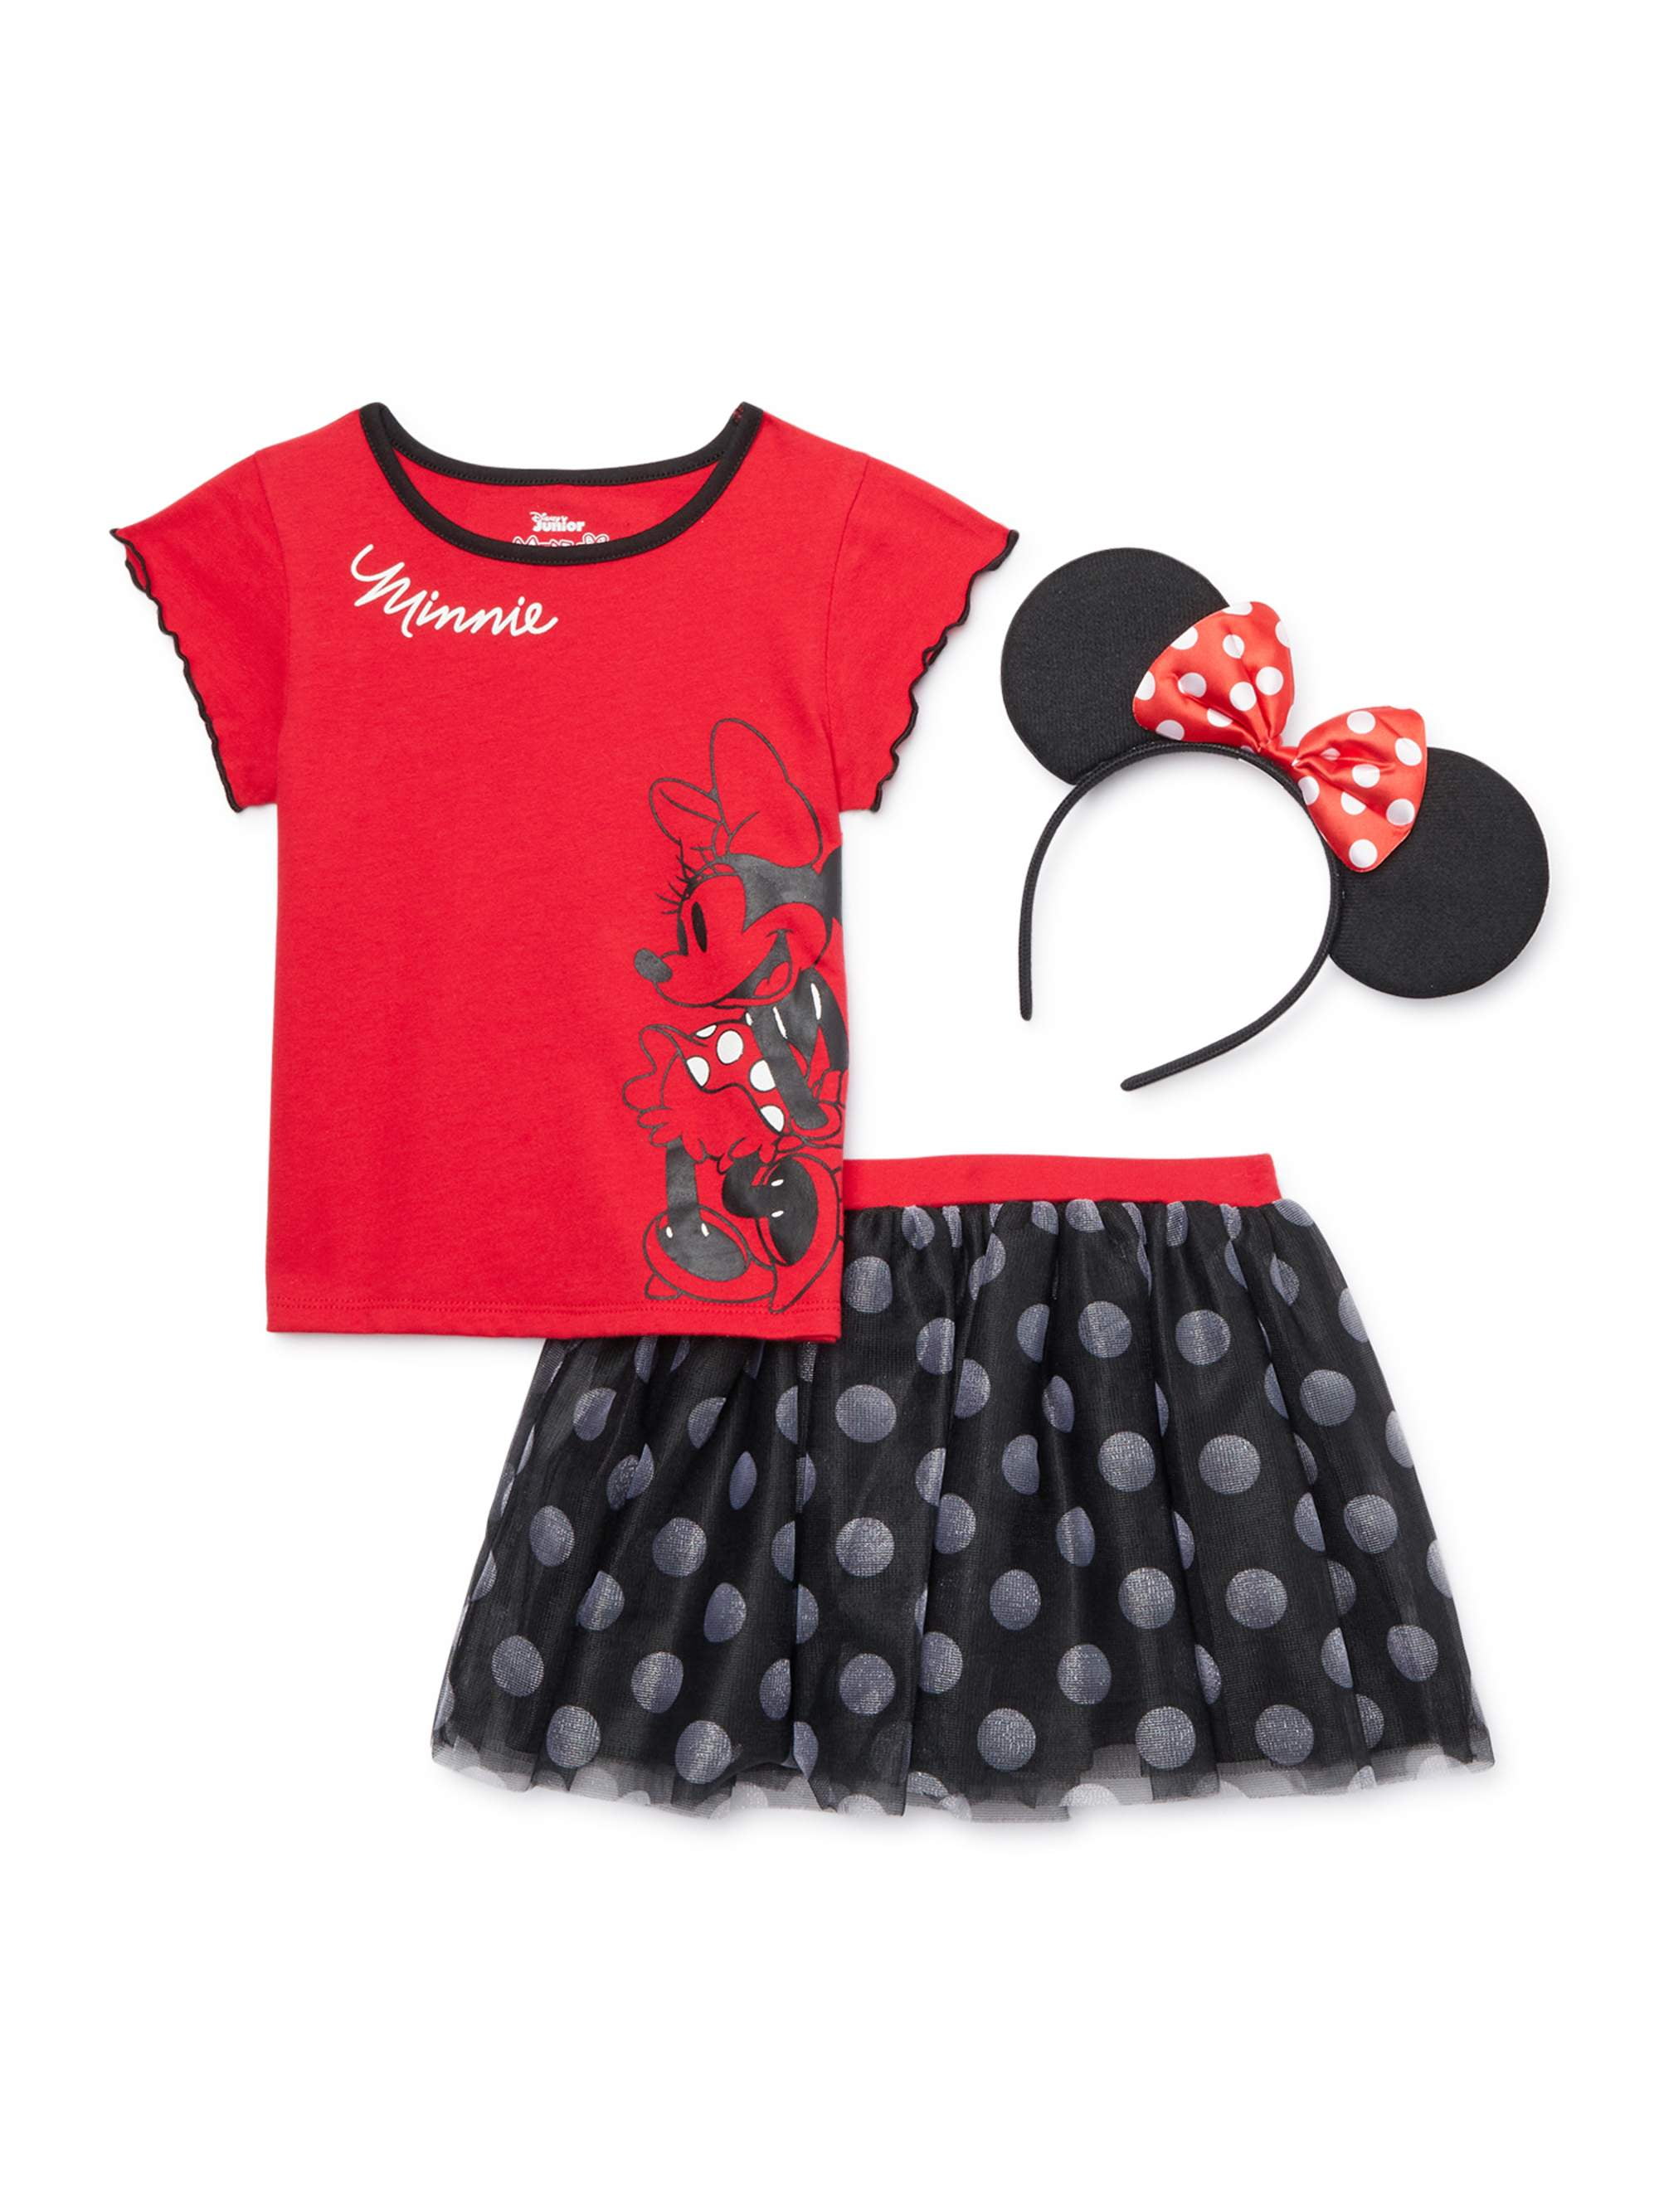 DISNEY STORE MINNIE MOUSE FRUIT PRINT DRESS SET FOR BABY TULLE EDGED UNDERSKIRT 